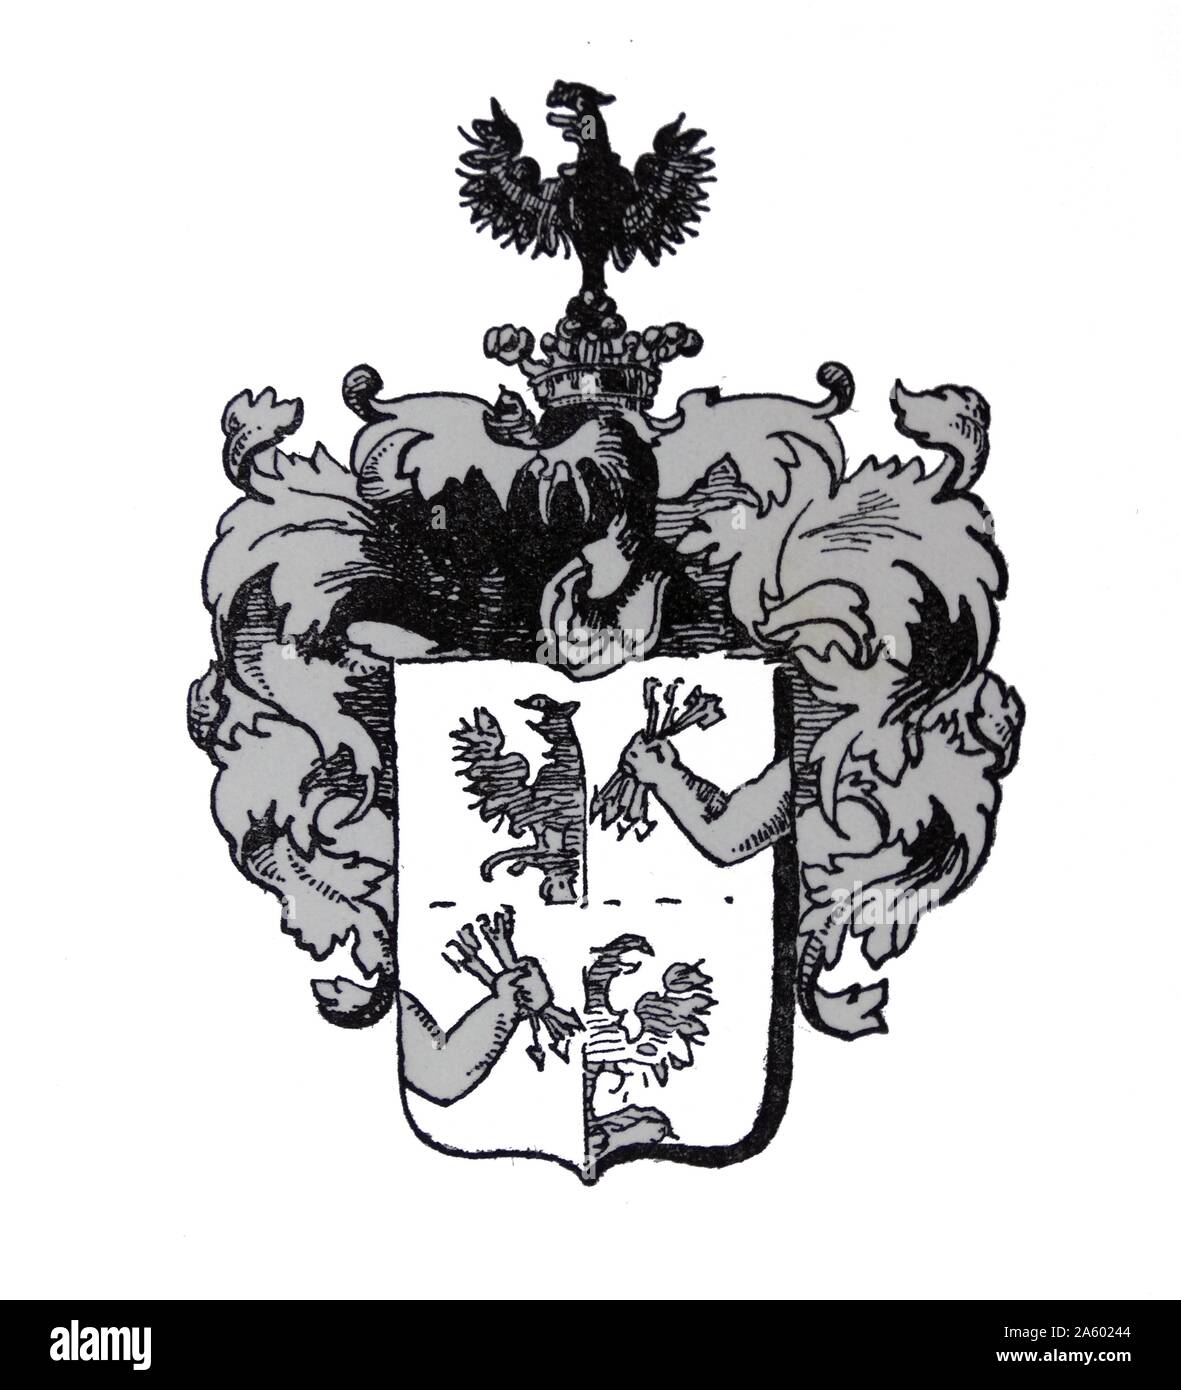 Family crest of the Rothschild banking family. The Rothschild's were a family financial dynasty in the 18th to 20th century Stock Photo